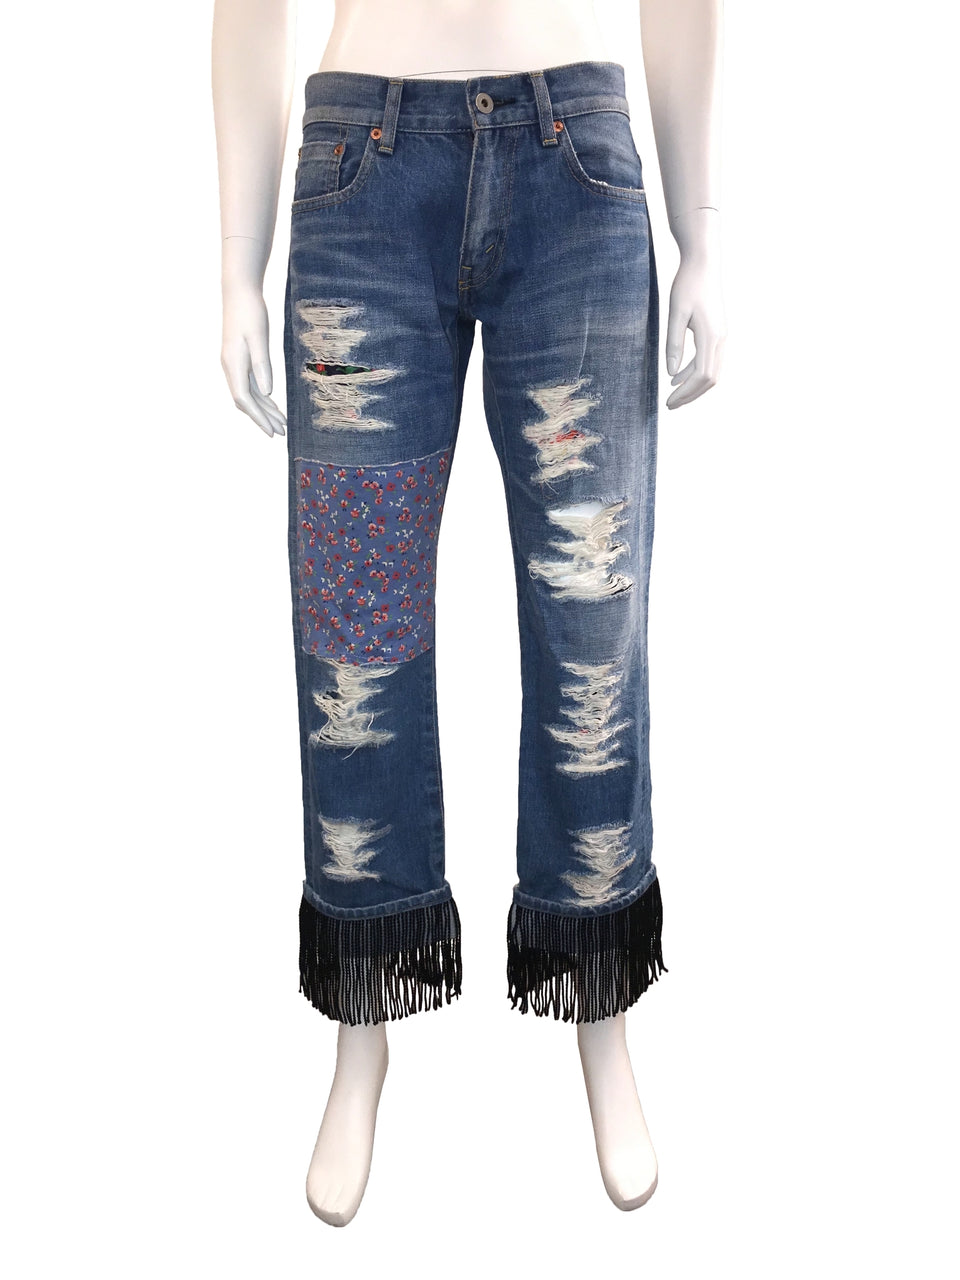 Patchwork Distressed Cropped Jeans with Fringe Bottom